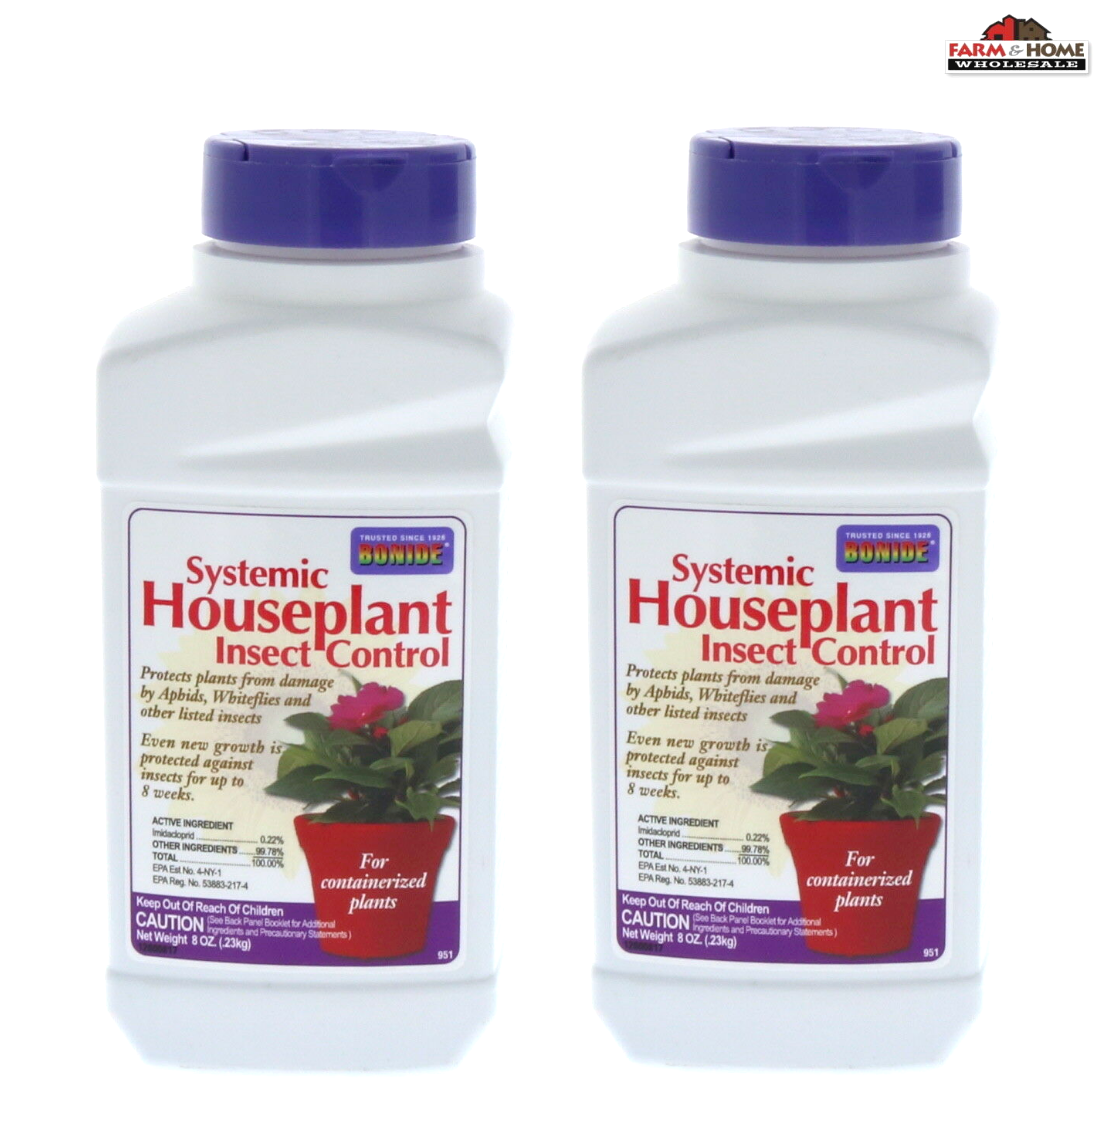 (2) Bonide Systemic House Plant Insect Control 8 Oz ~ SHIPS FAST Bonide 902051, 109145